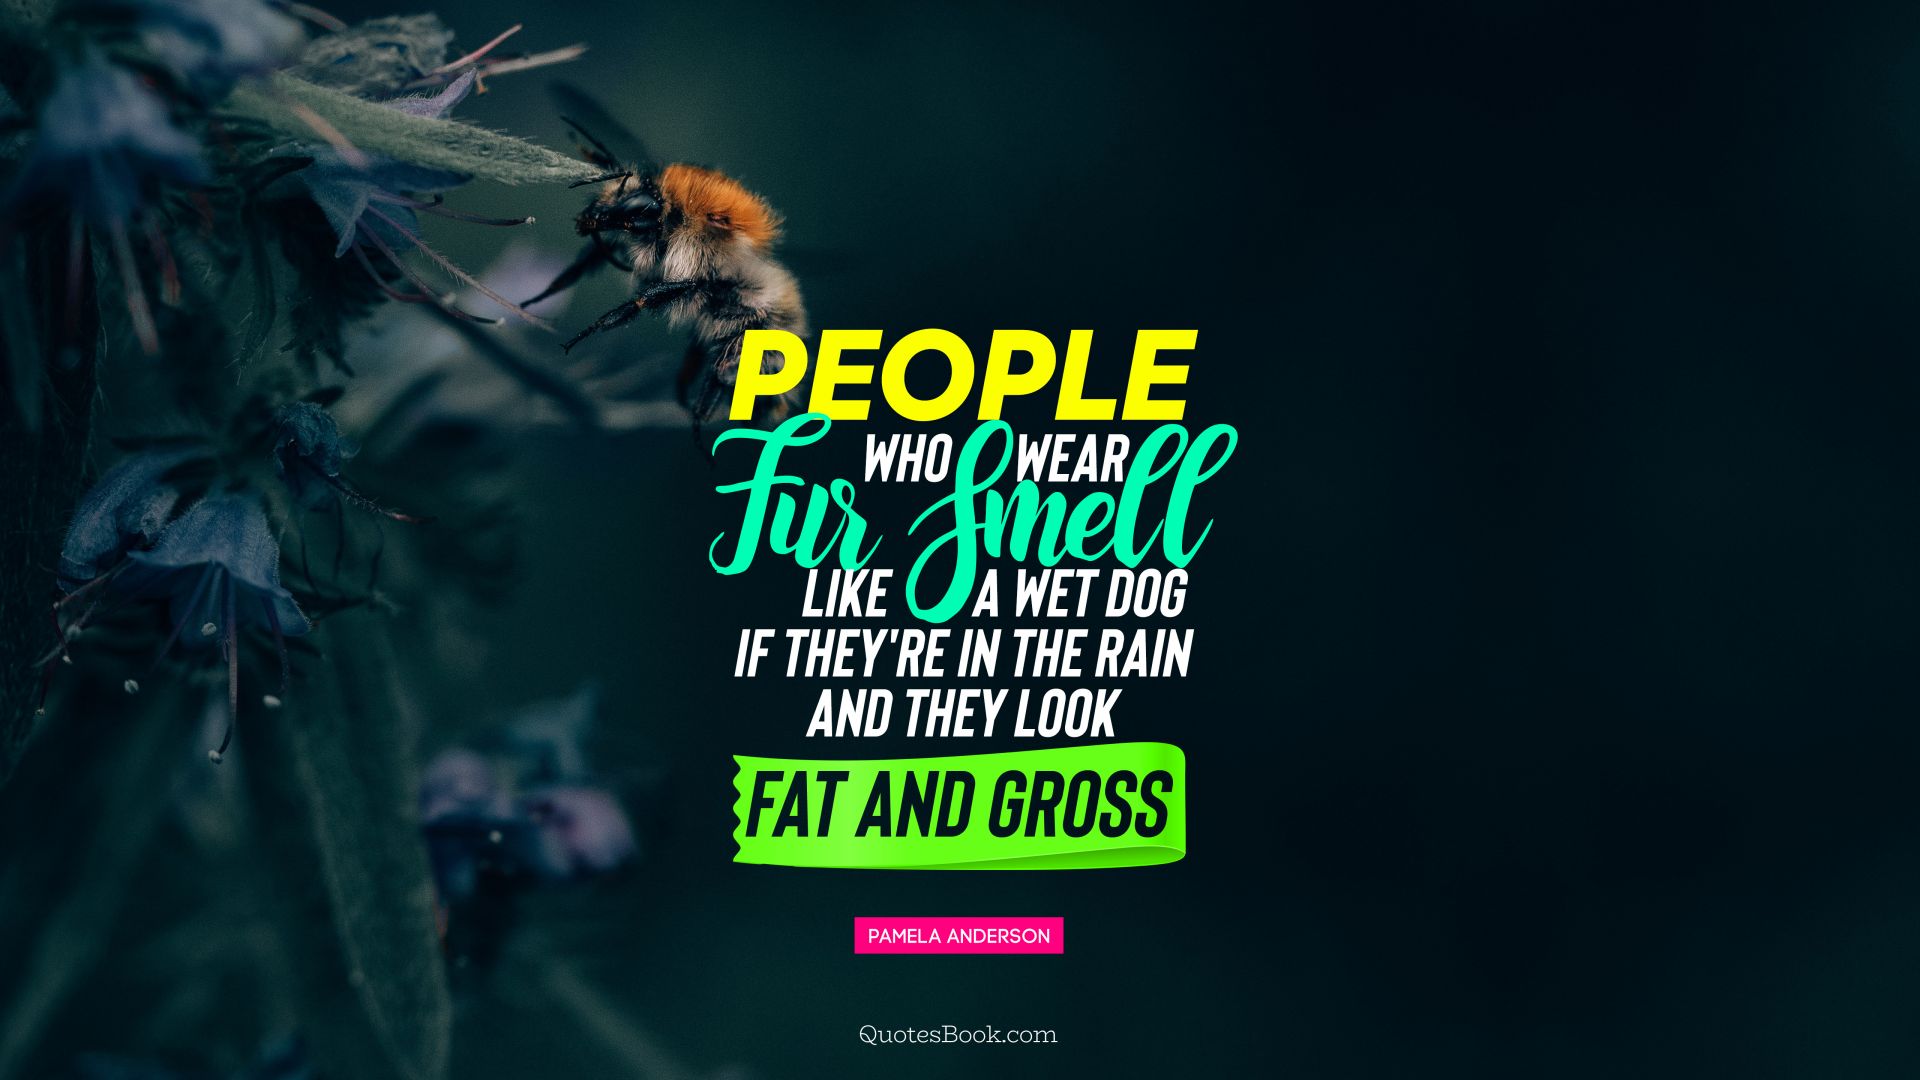 People who wear fur smell like a wet dog if they're in the rain and they look fat and gross. - Quote by Pamela Anderson